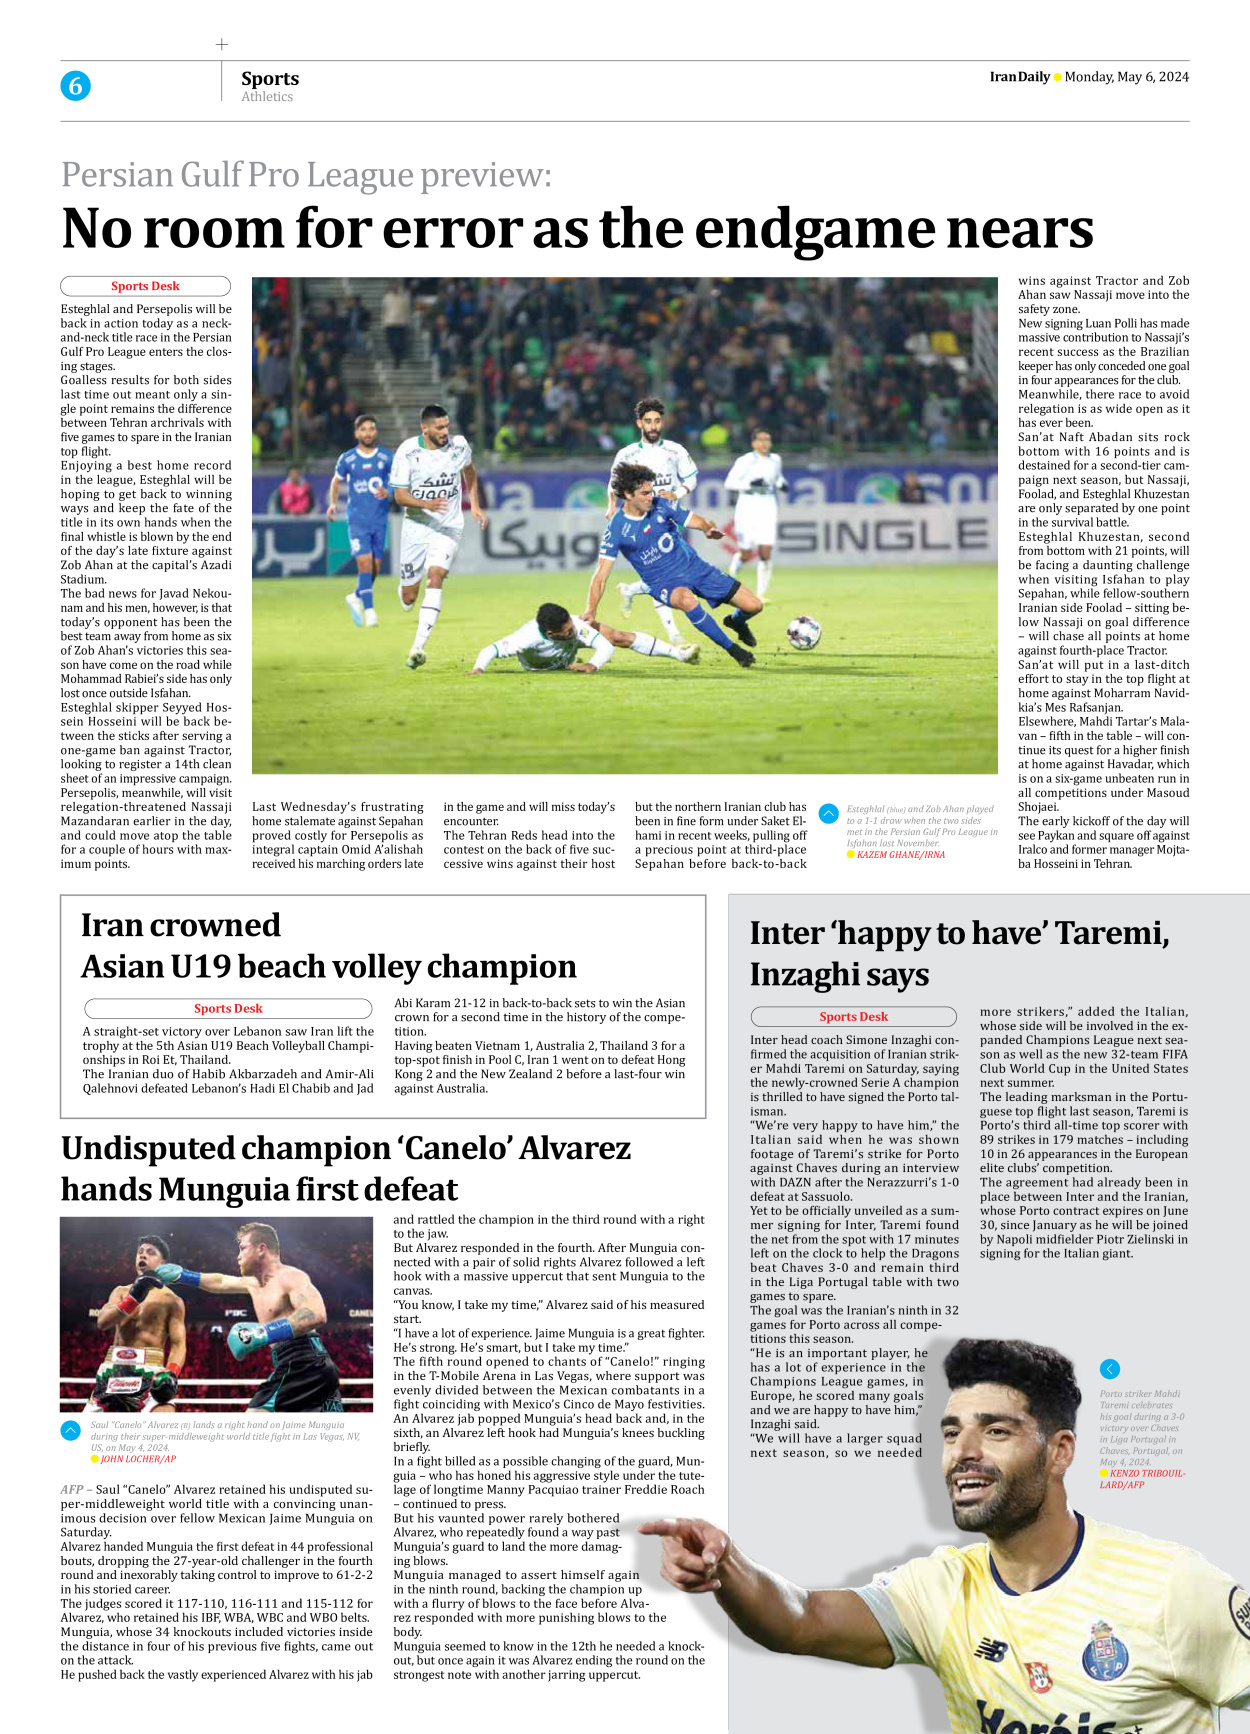 Iran Daily - Number Seven Thousand Five Hundred and Fifty - 06 May 2024 - Page 6